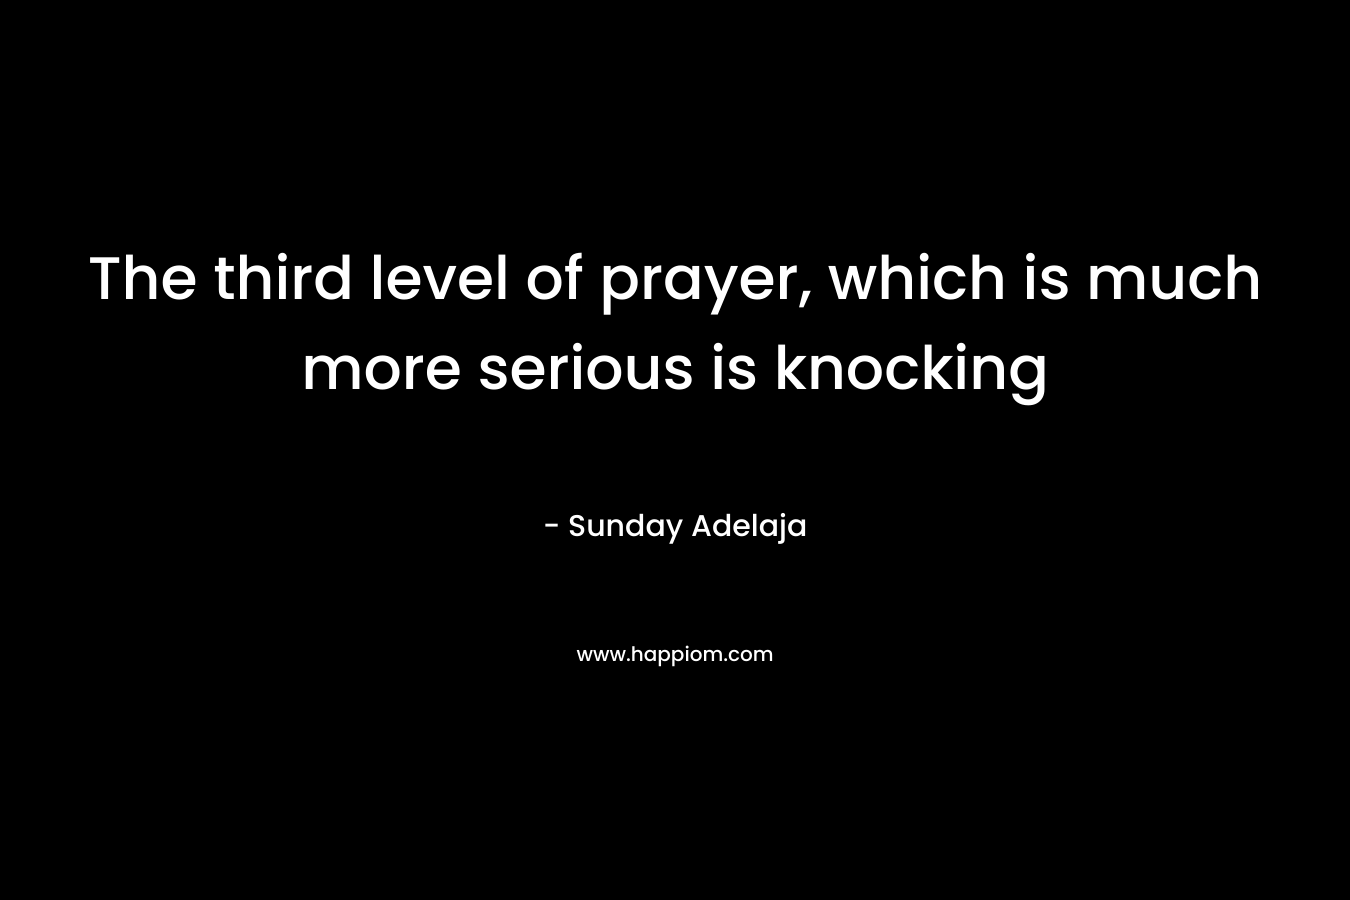 The third level of prayer, which is much more serious is knocking